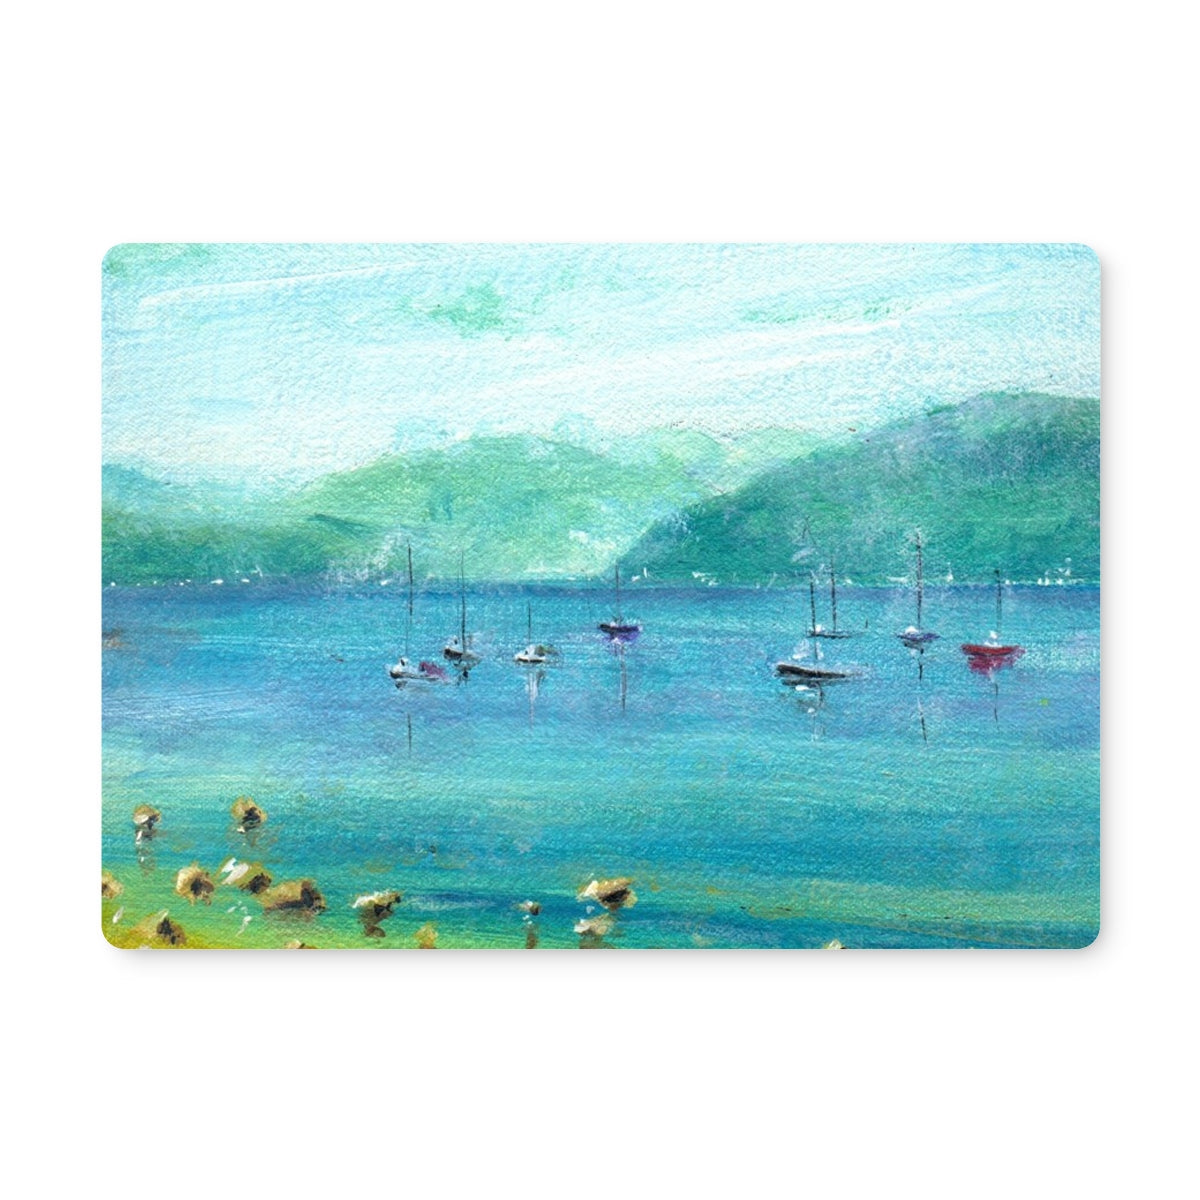 A Clyde Summer Day Art Gifts Placemat-Placemats-River Clyde Art Gallery-2 Placemats-Paintings, Prints, Homeware, Art Gifts From Scotland By Scottish Artist Kevin Hunter